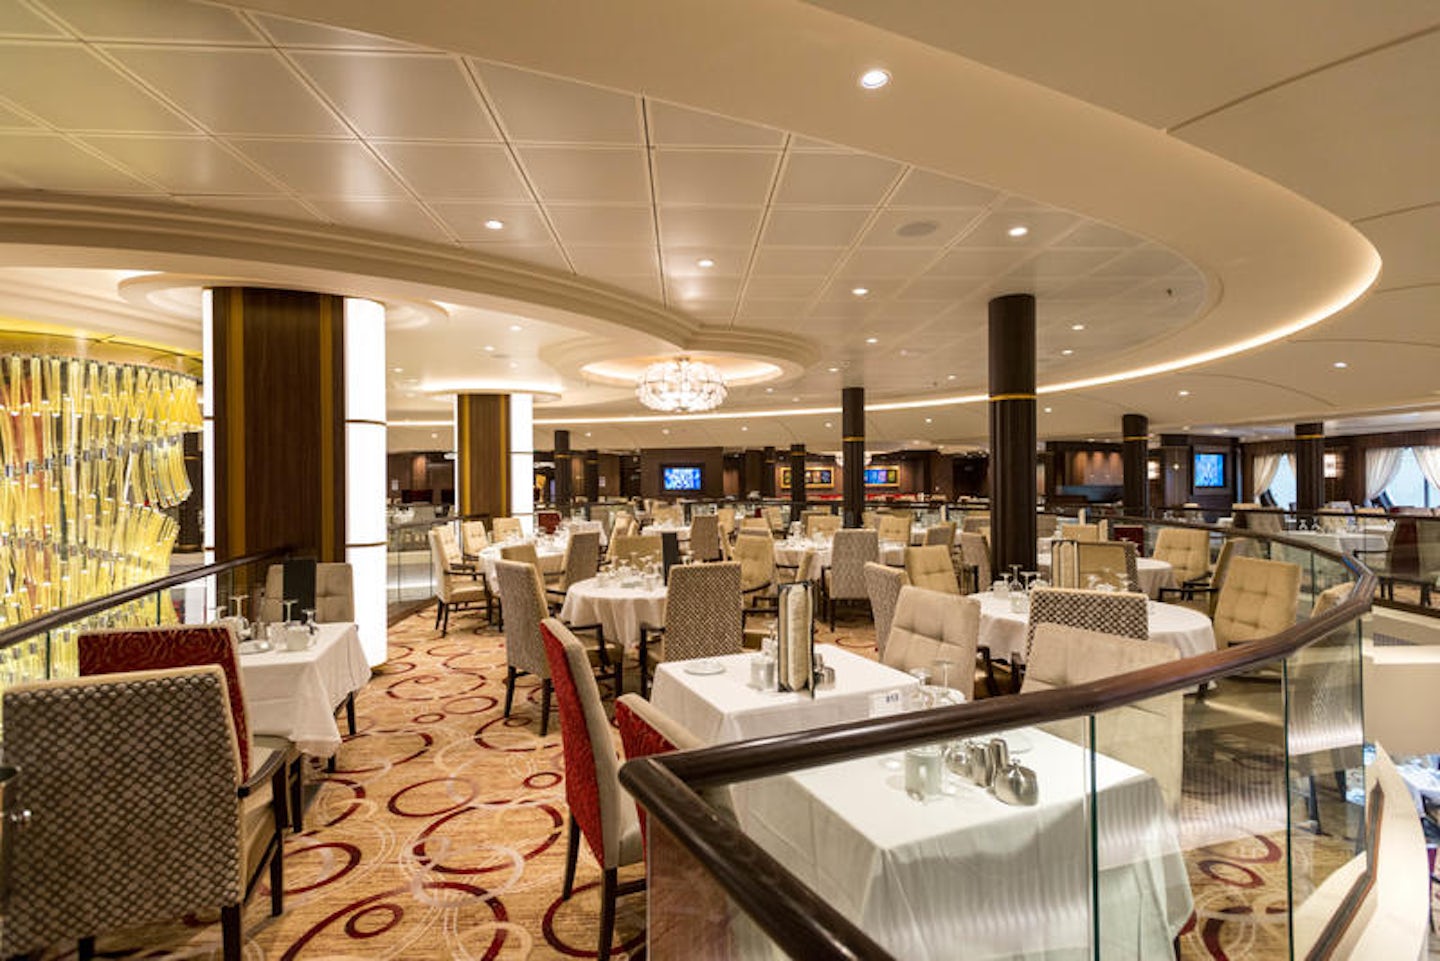 Symphony Of The Seas Dining Room